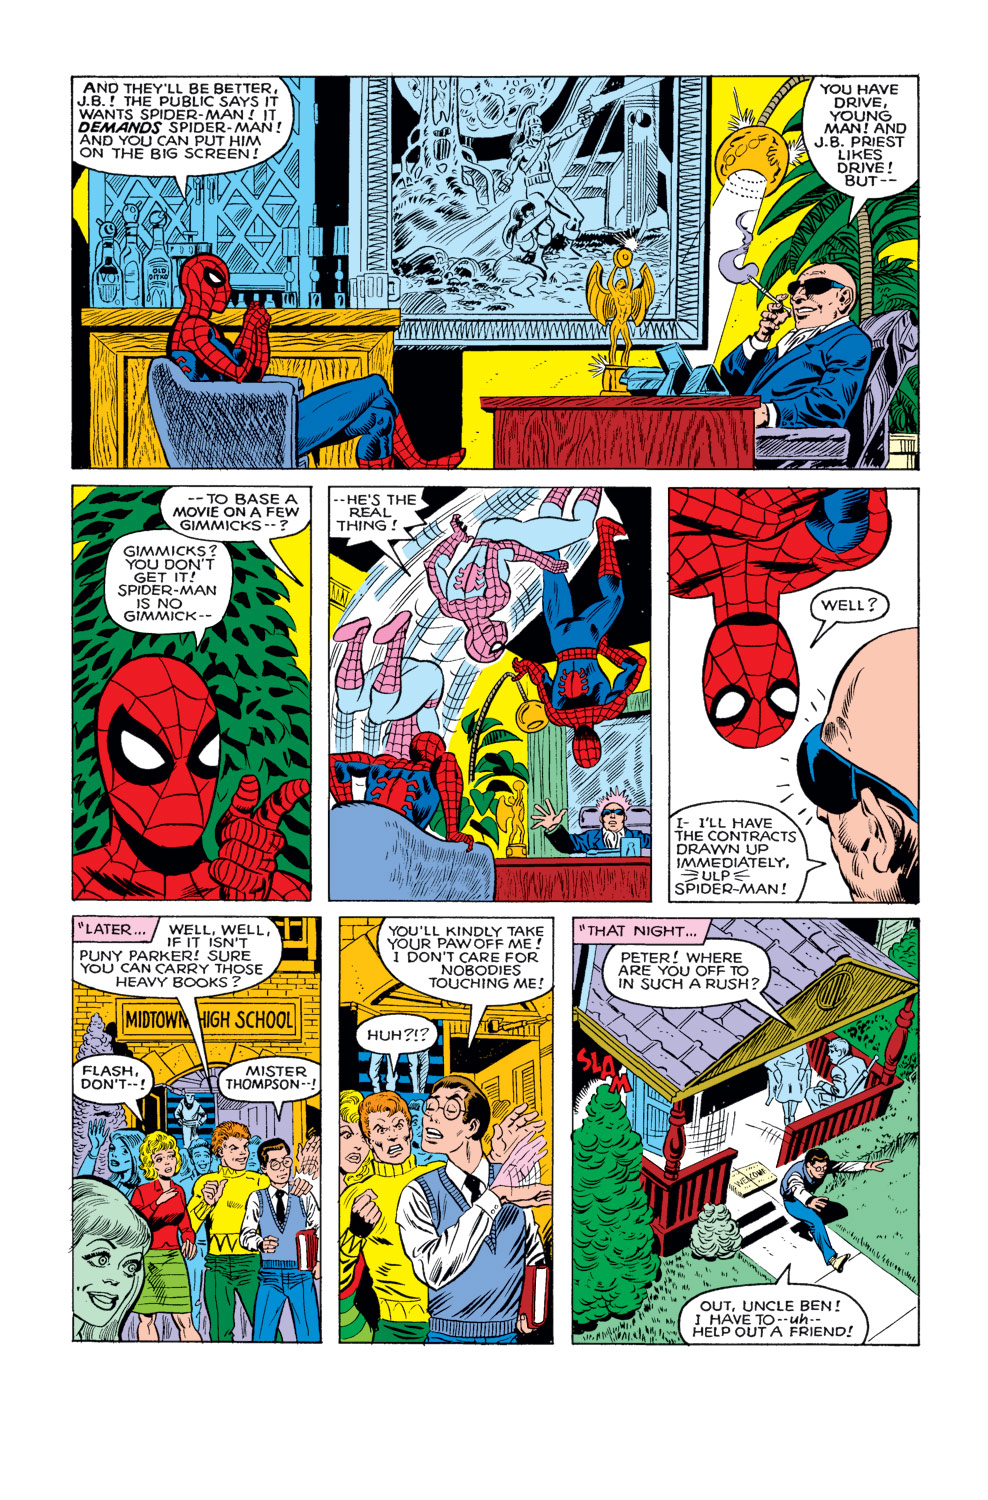 What If? (1977) issue 19 - Spider-Man had never become a crimefighter - Page 6